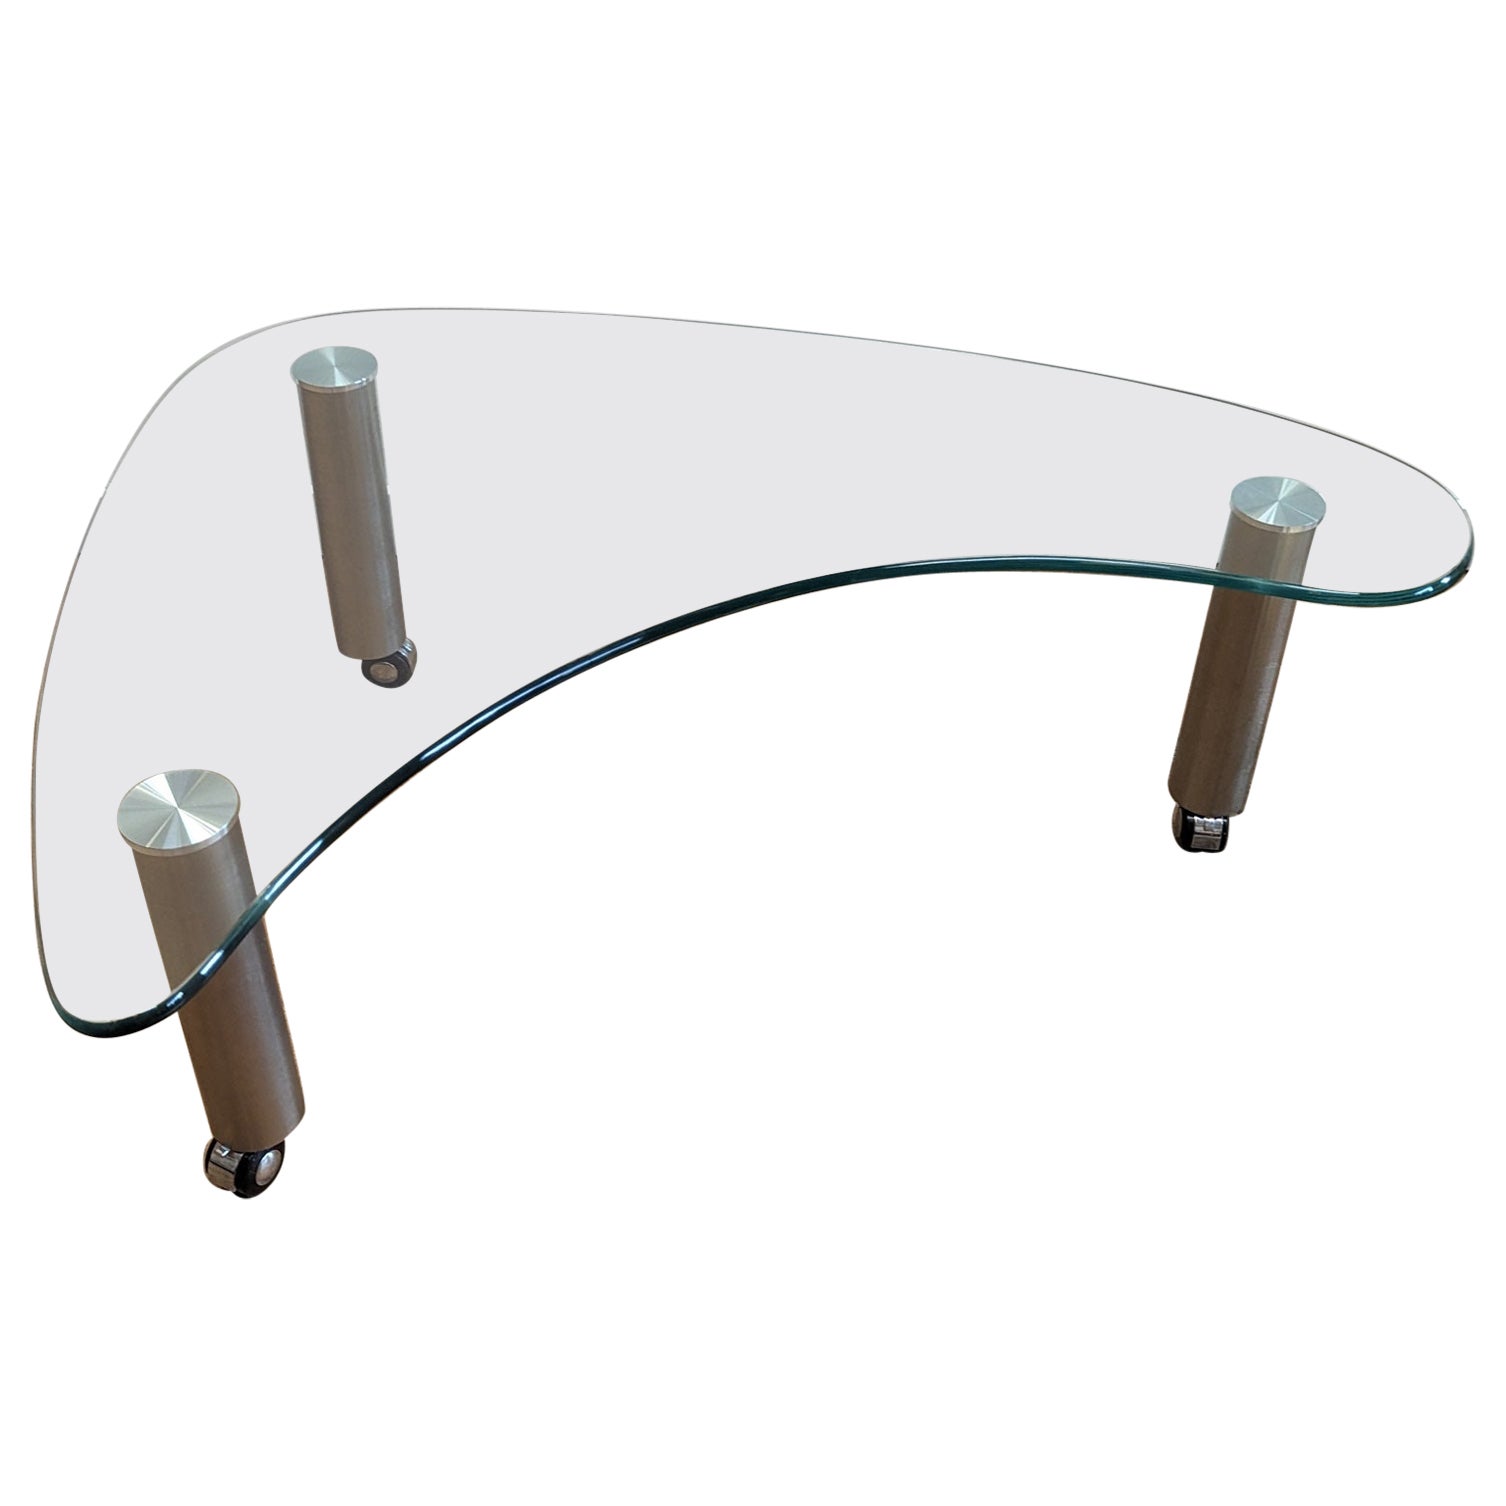 Glass Biomorphic Coffee table on casters  For Sale